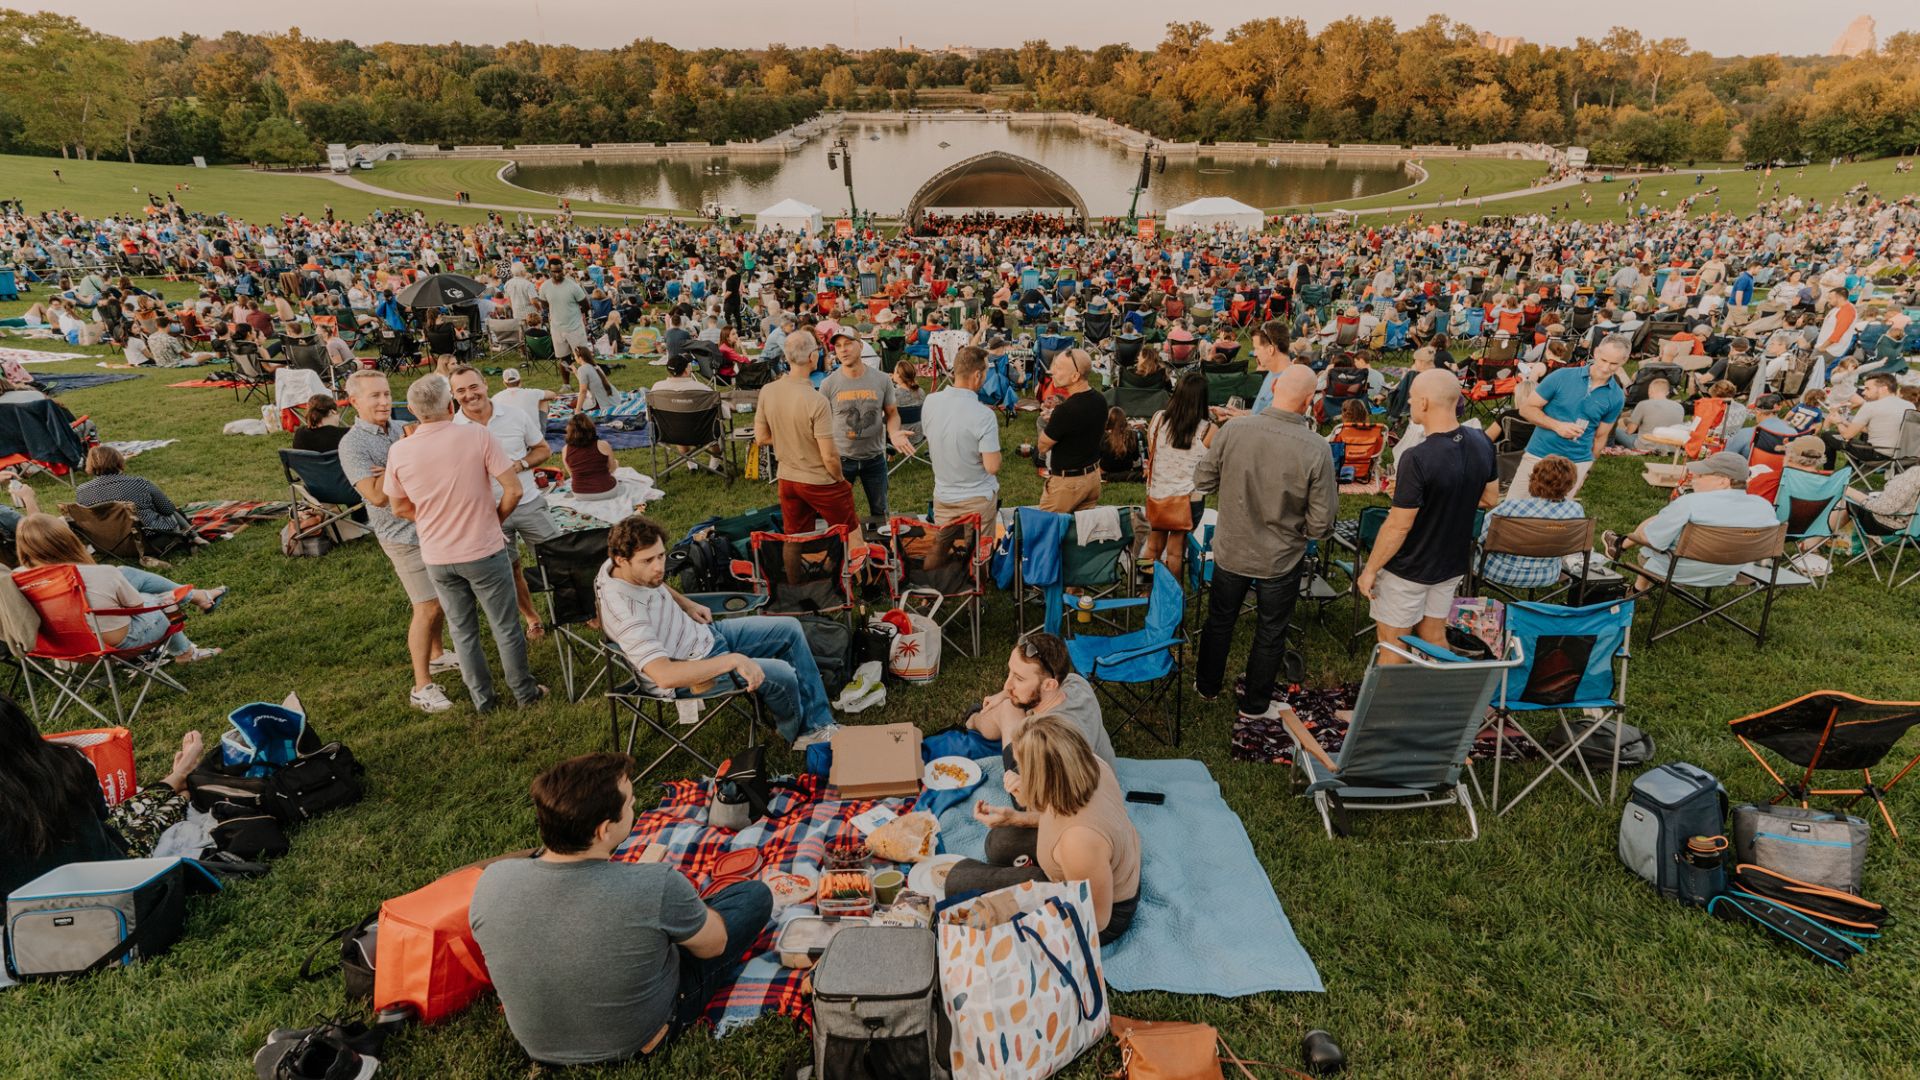 People gather on Art Hill for the annual St. Louis Symphony Orchestra concert in Forest Park.